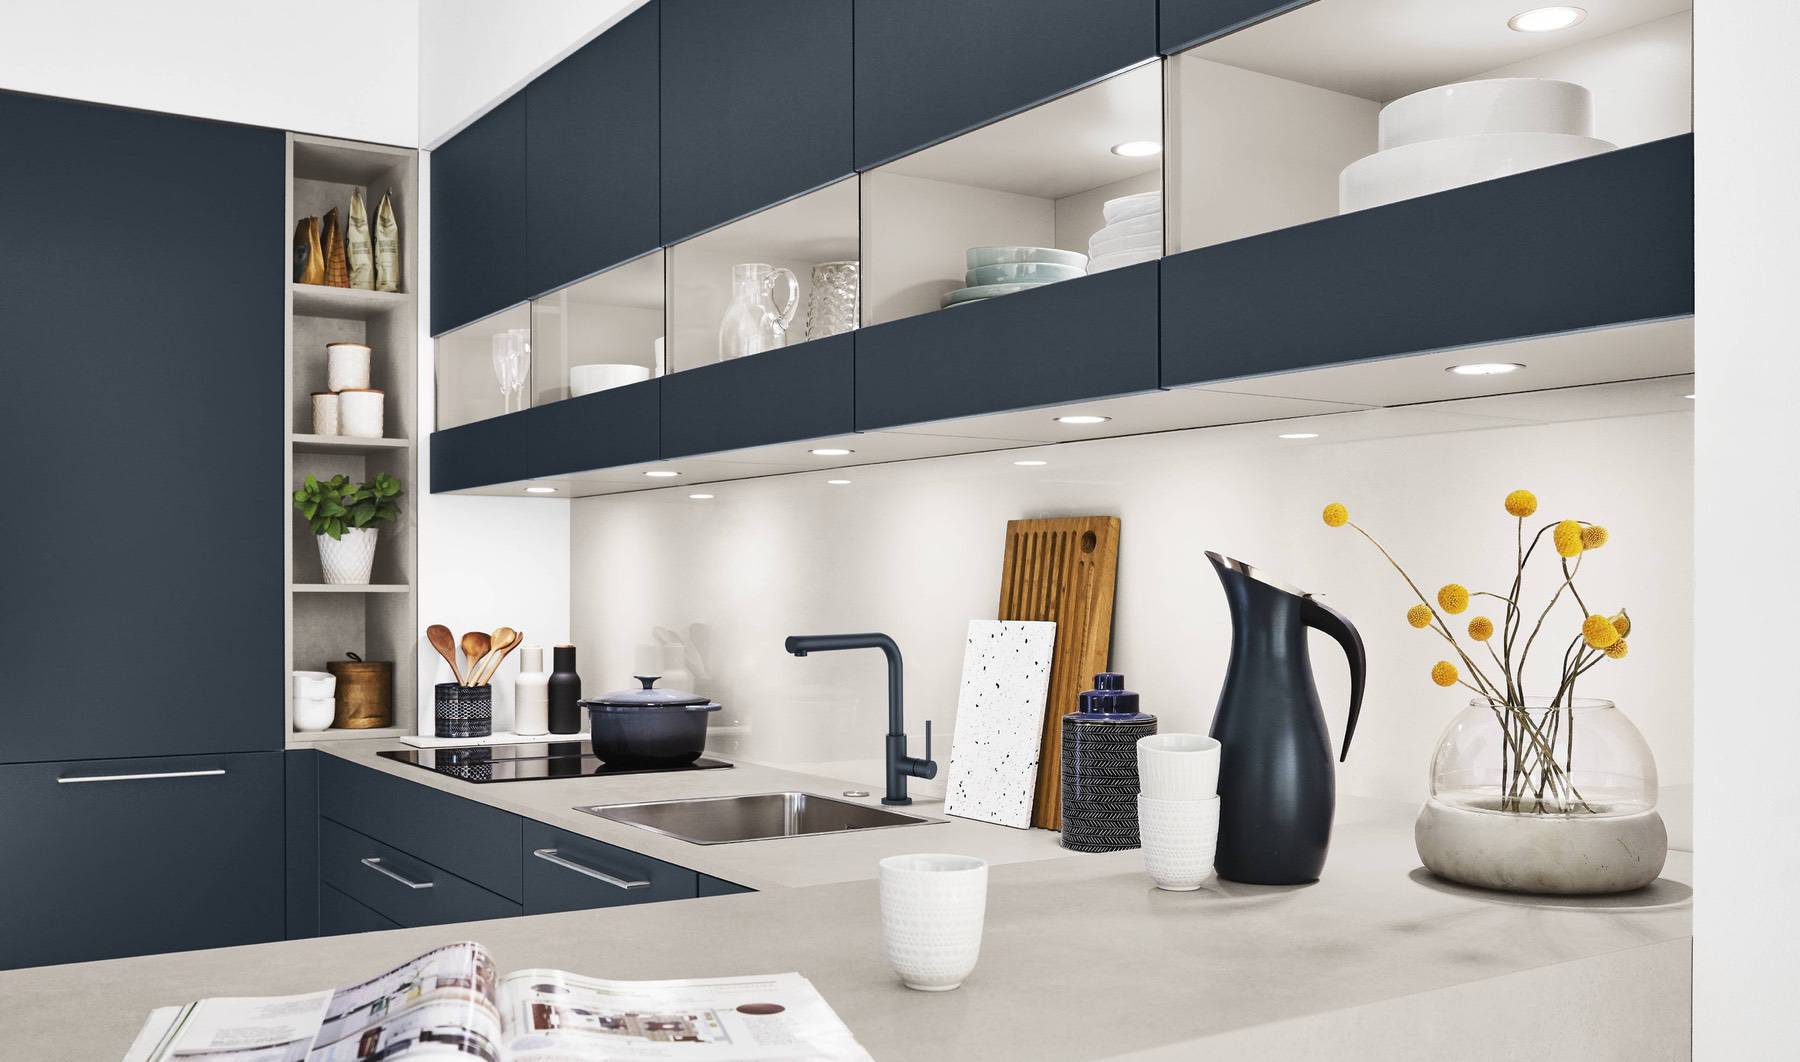 30524 21 Easytouch 966 R1 D | Nobilia German Kitchens by Square, Sheffield